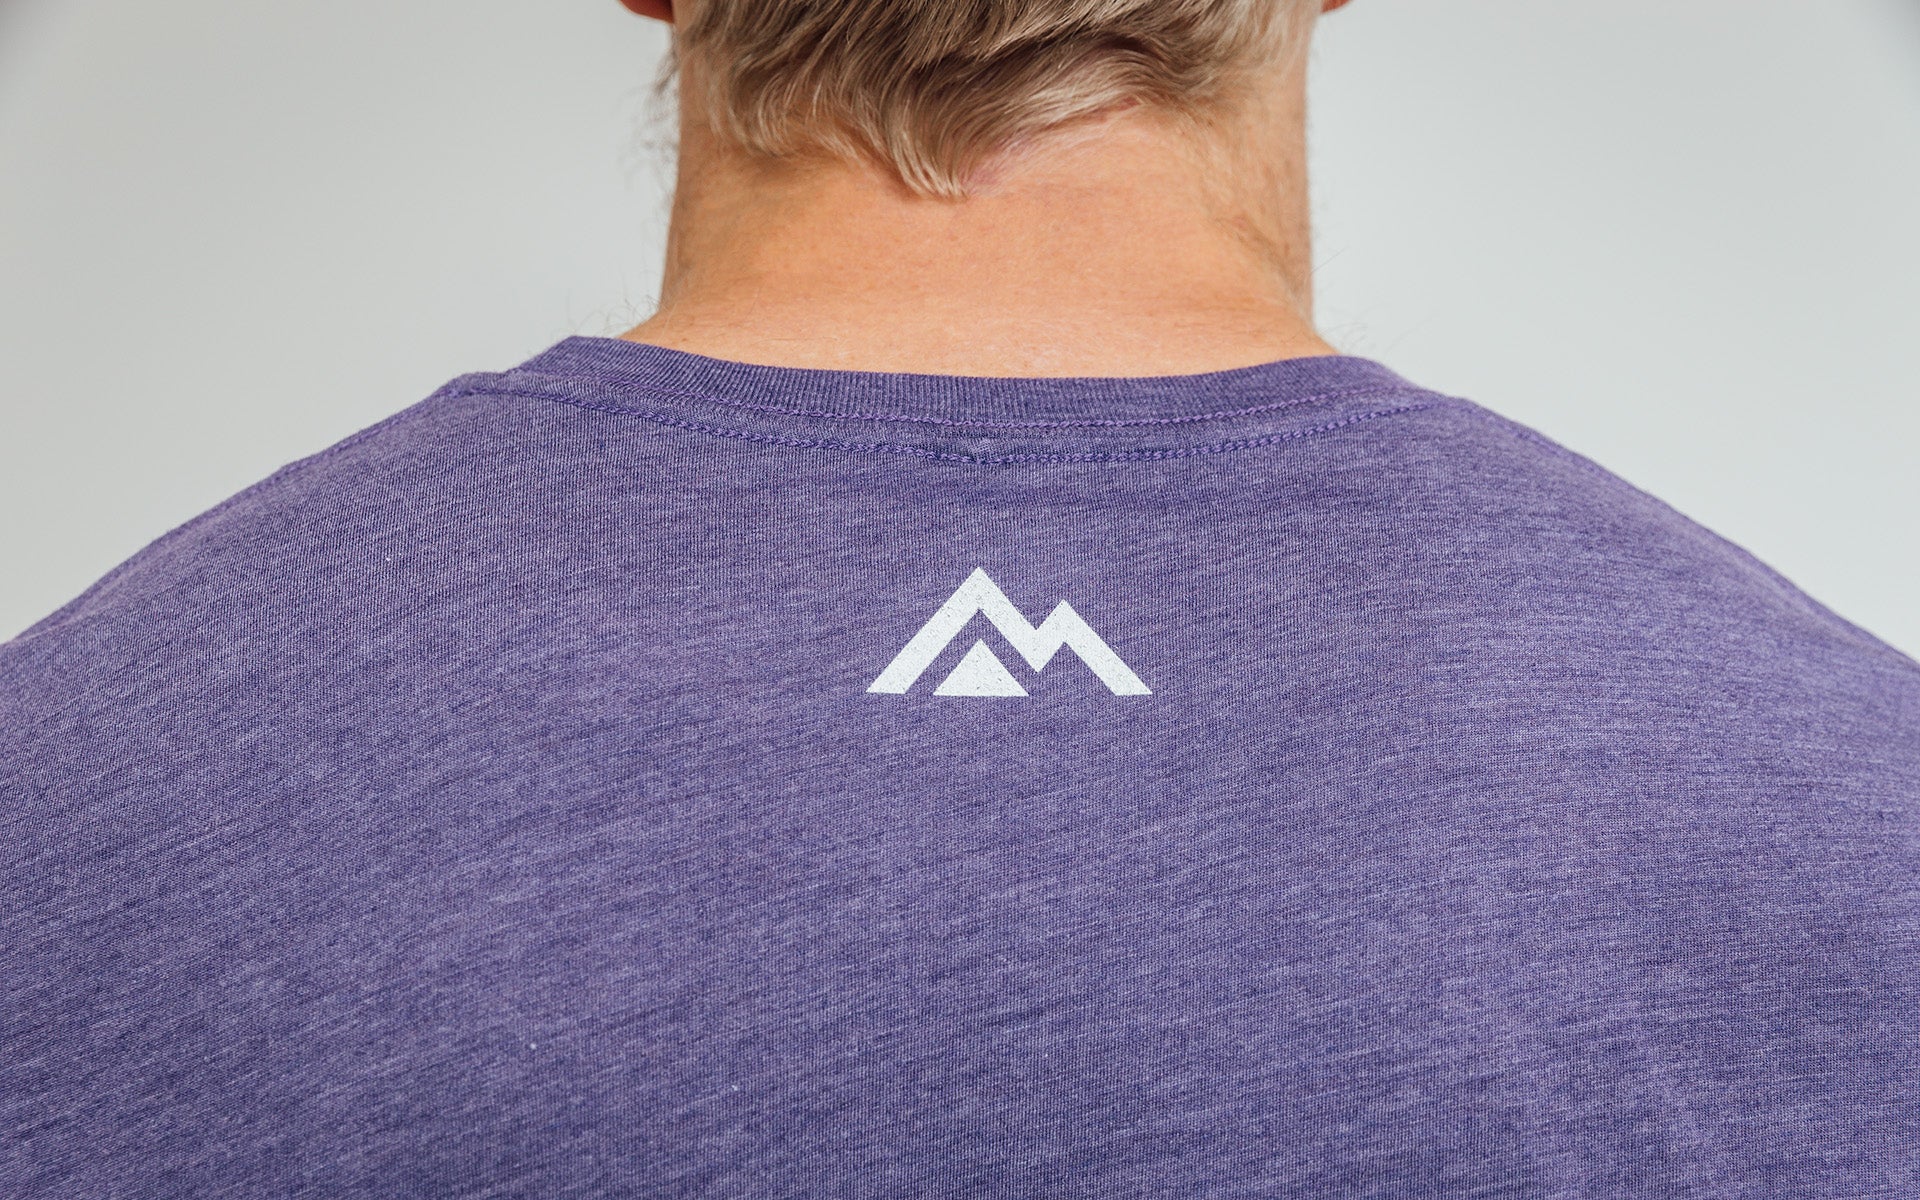 REP mountain logo on back of purple daily driver shirt